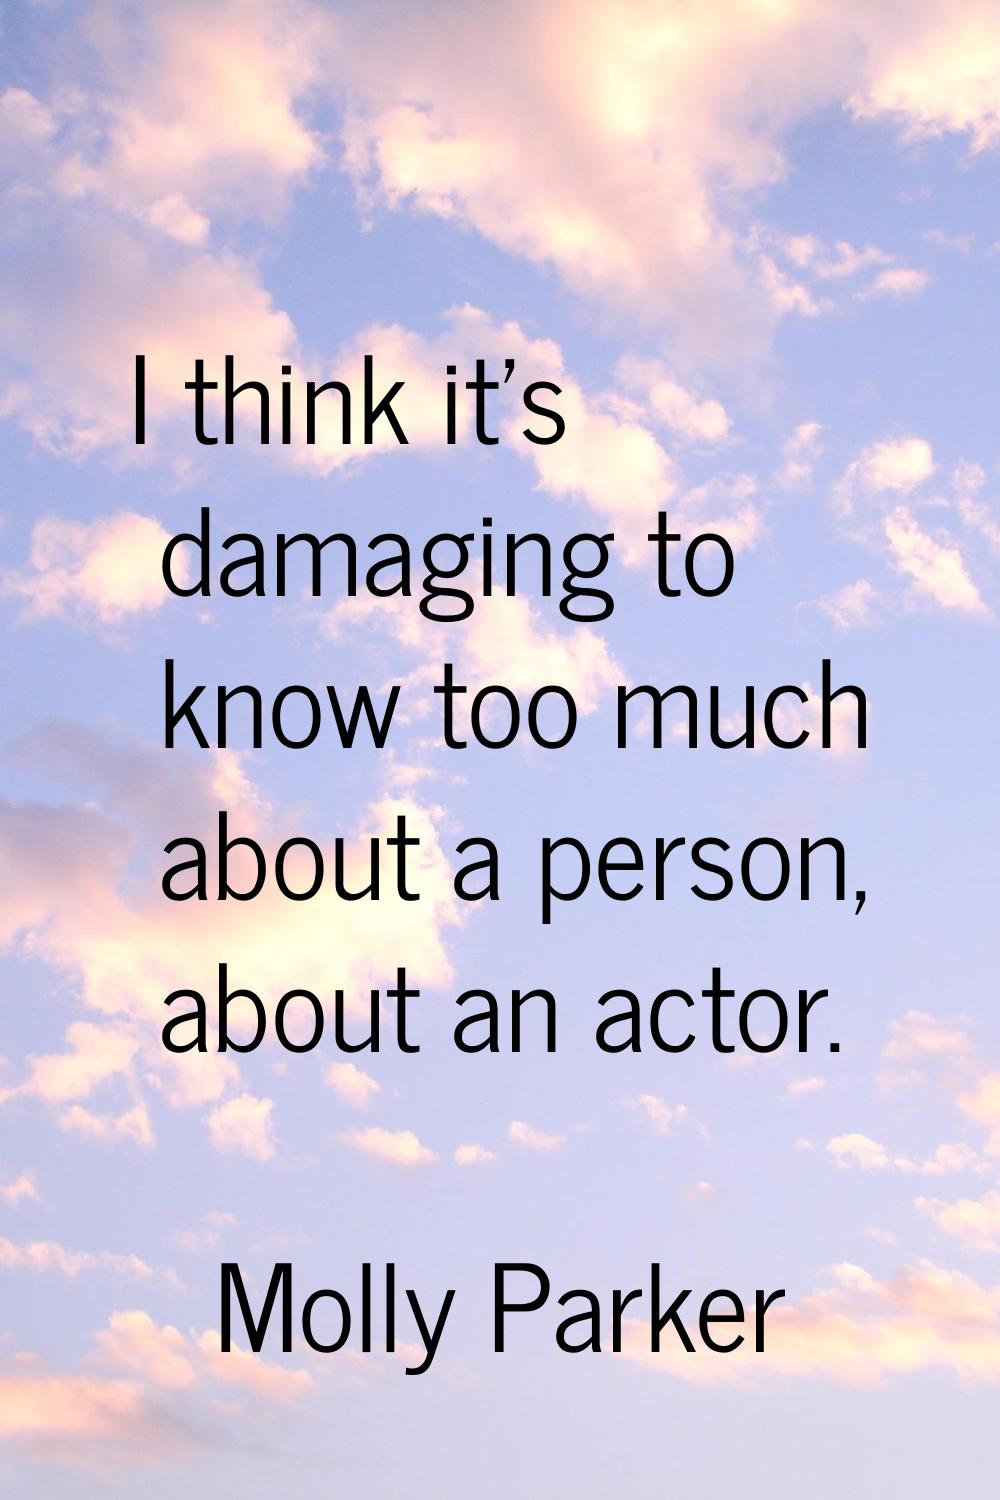 I think it's damaging to know too much about a person, about an actor.